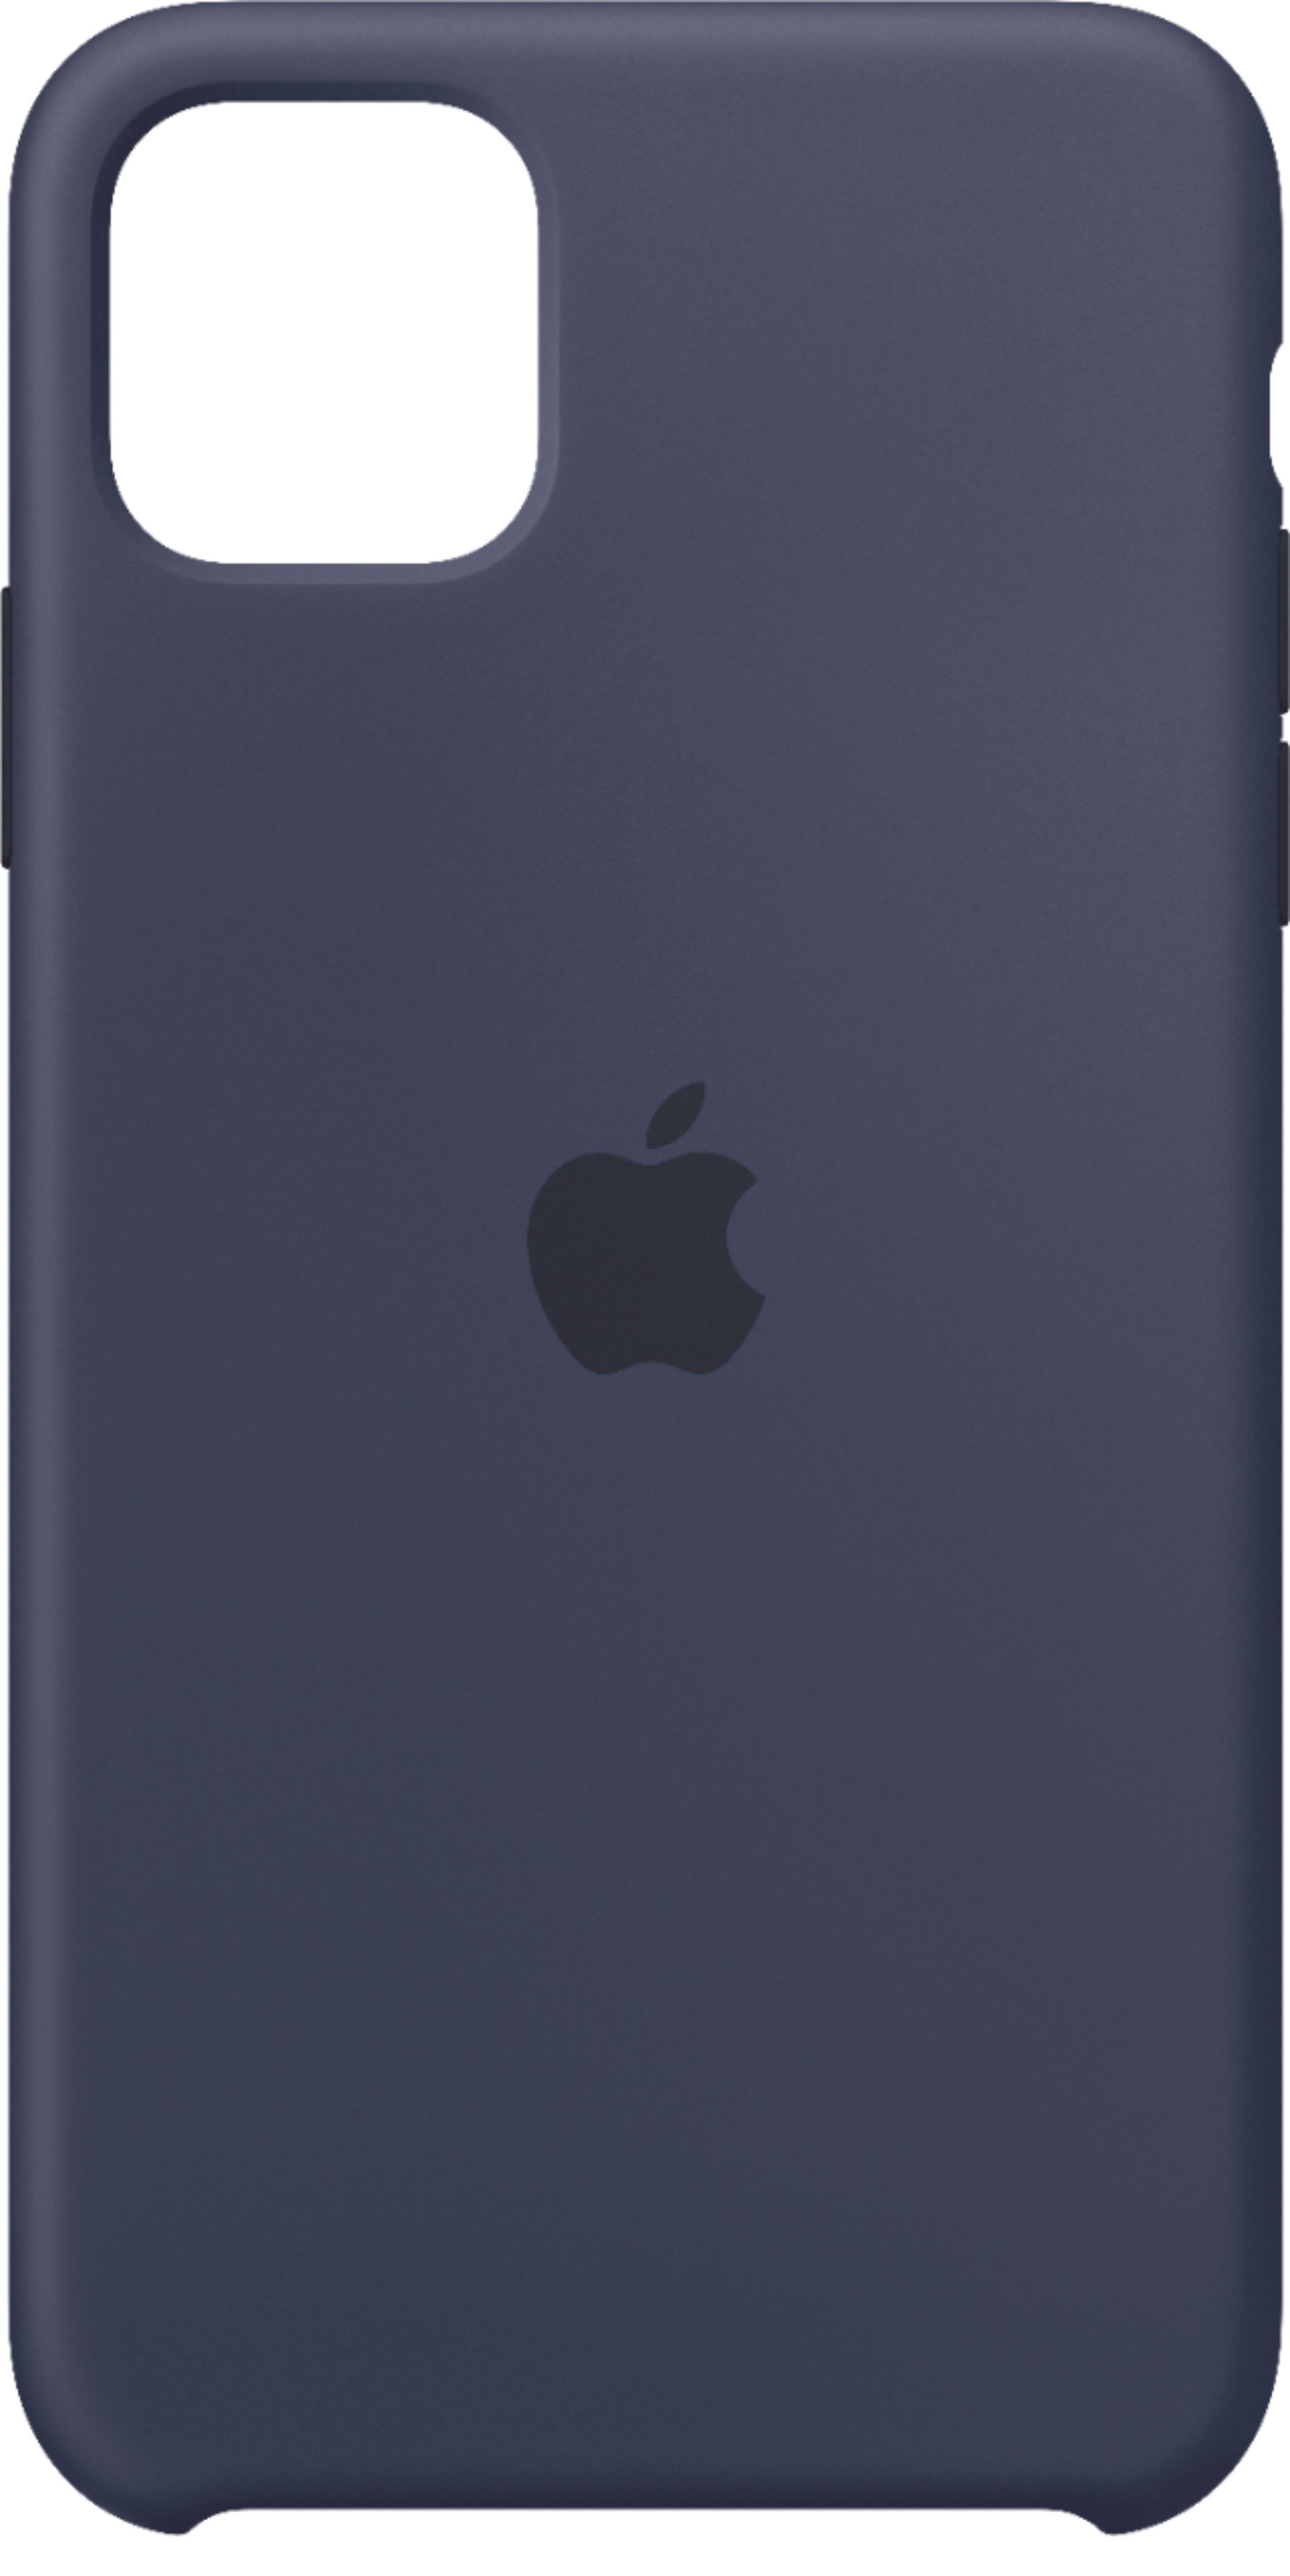 Apple Iphone 11 Pro Max Silicone Case Midnight Blue Mwyw2zm A Best Buy